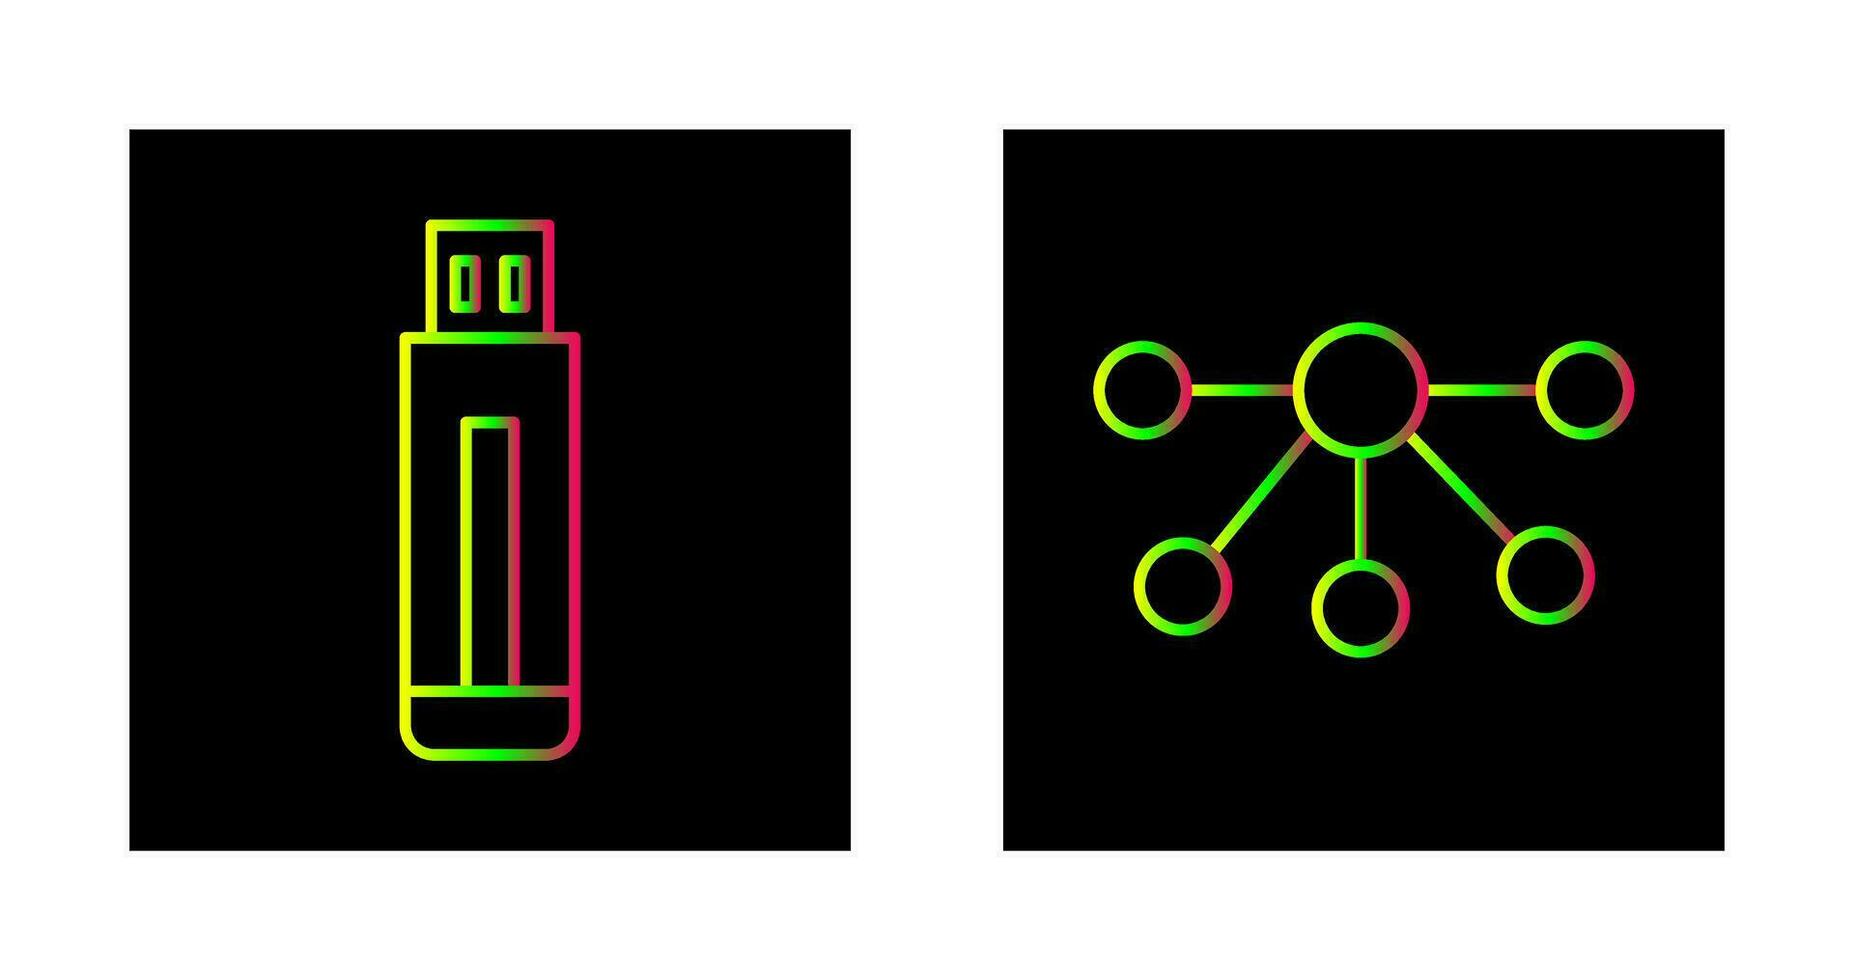 USB Drive and Nodes Icon vector